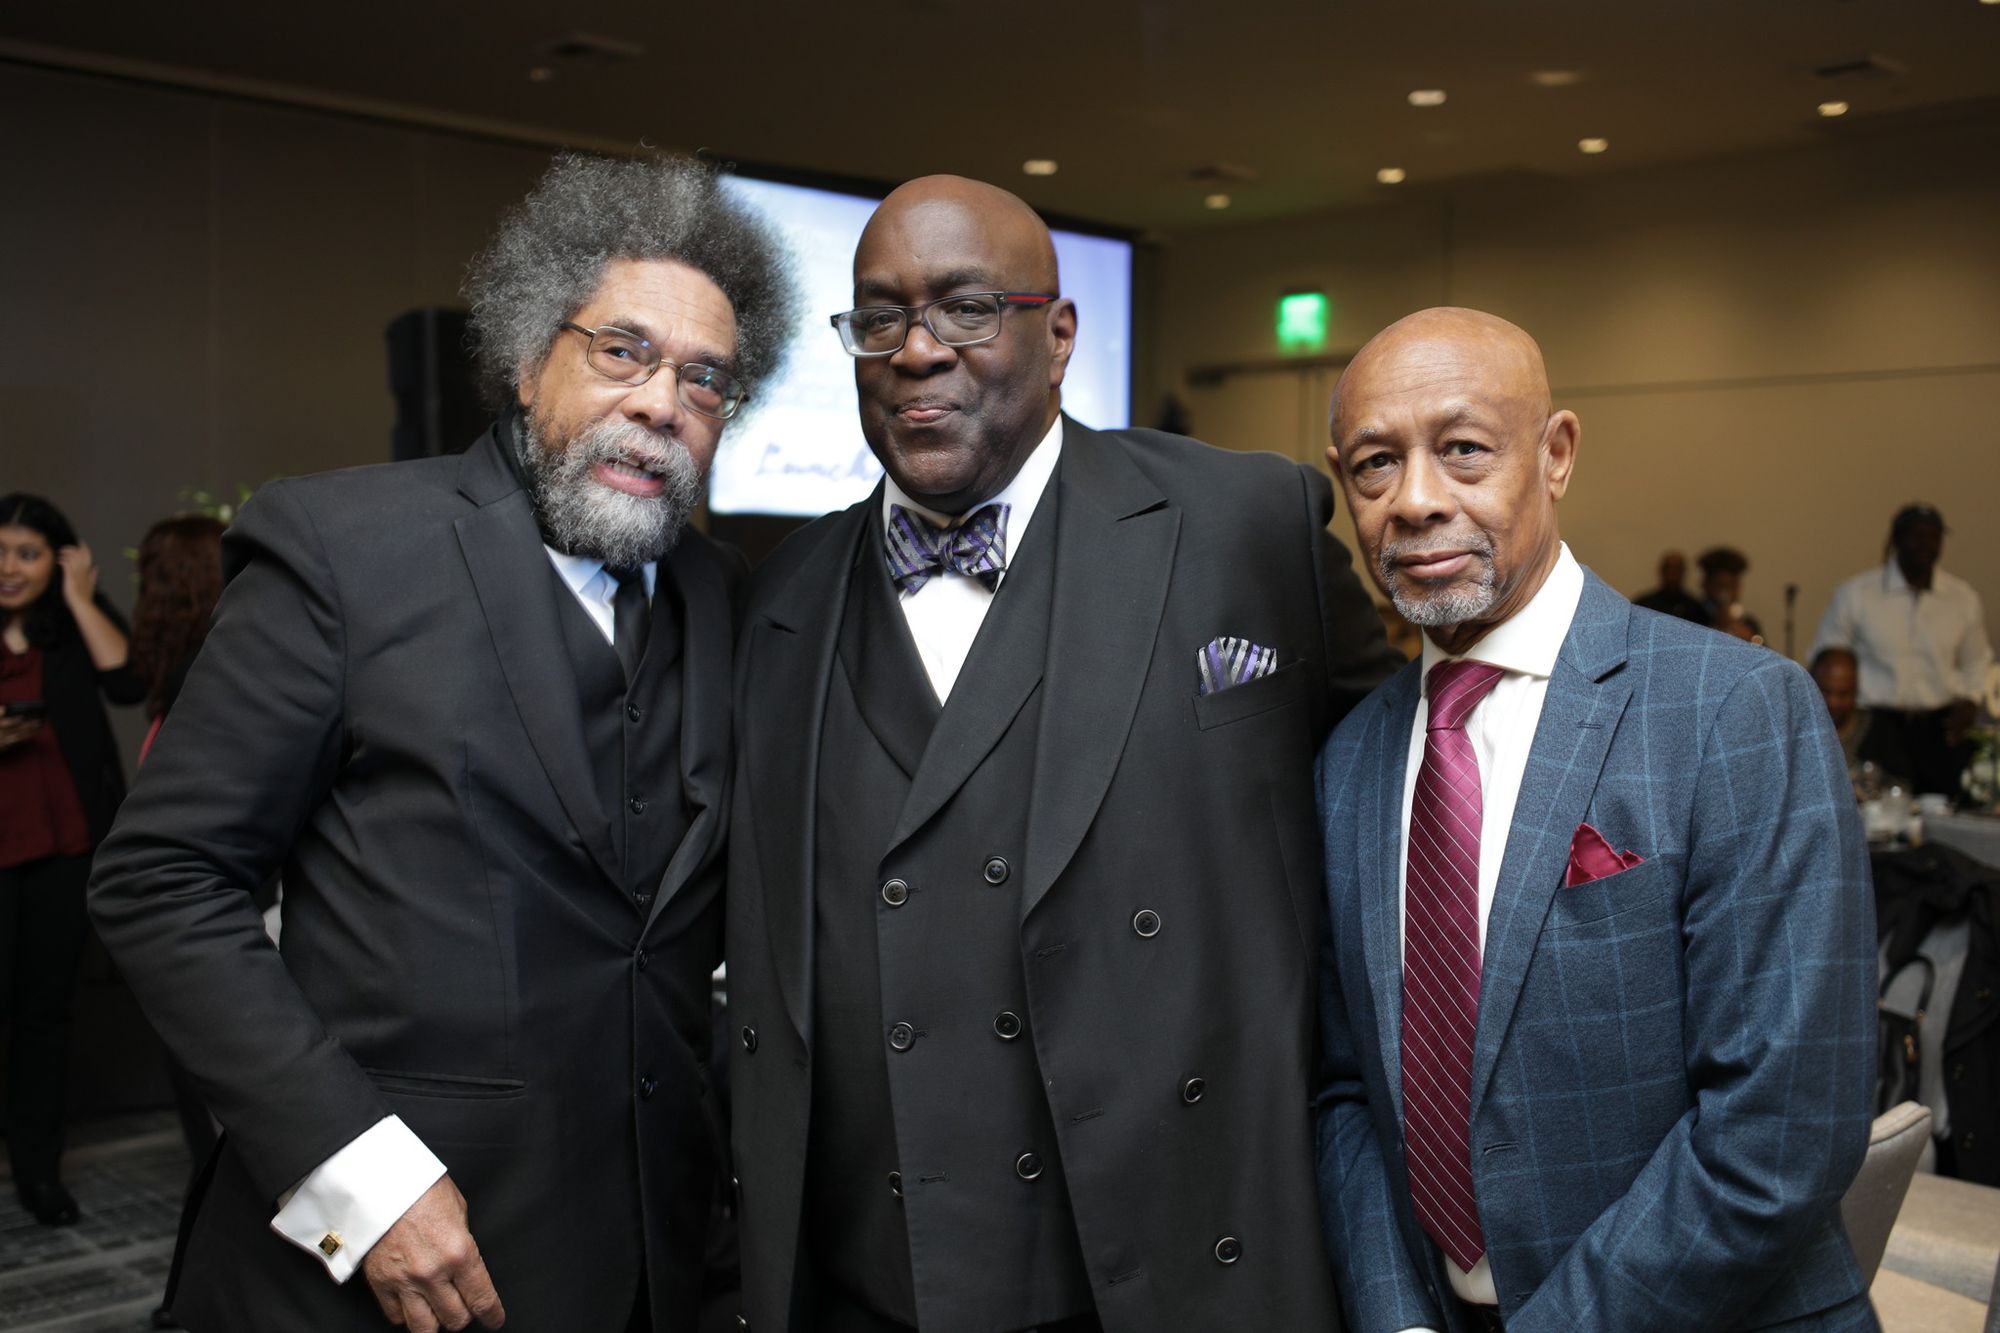 L.A. Focus: SCLC Honors L.A. Focus Publisher Lisa Collins with Dr. Martin Luther King, Jr. Service Award